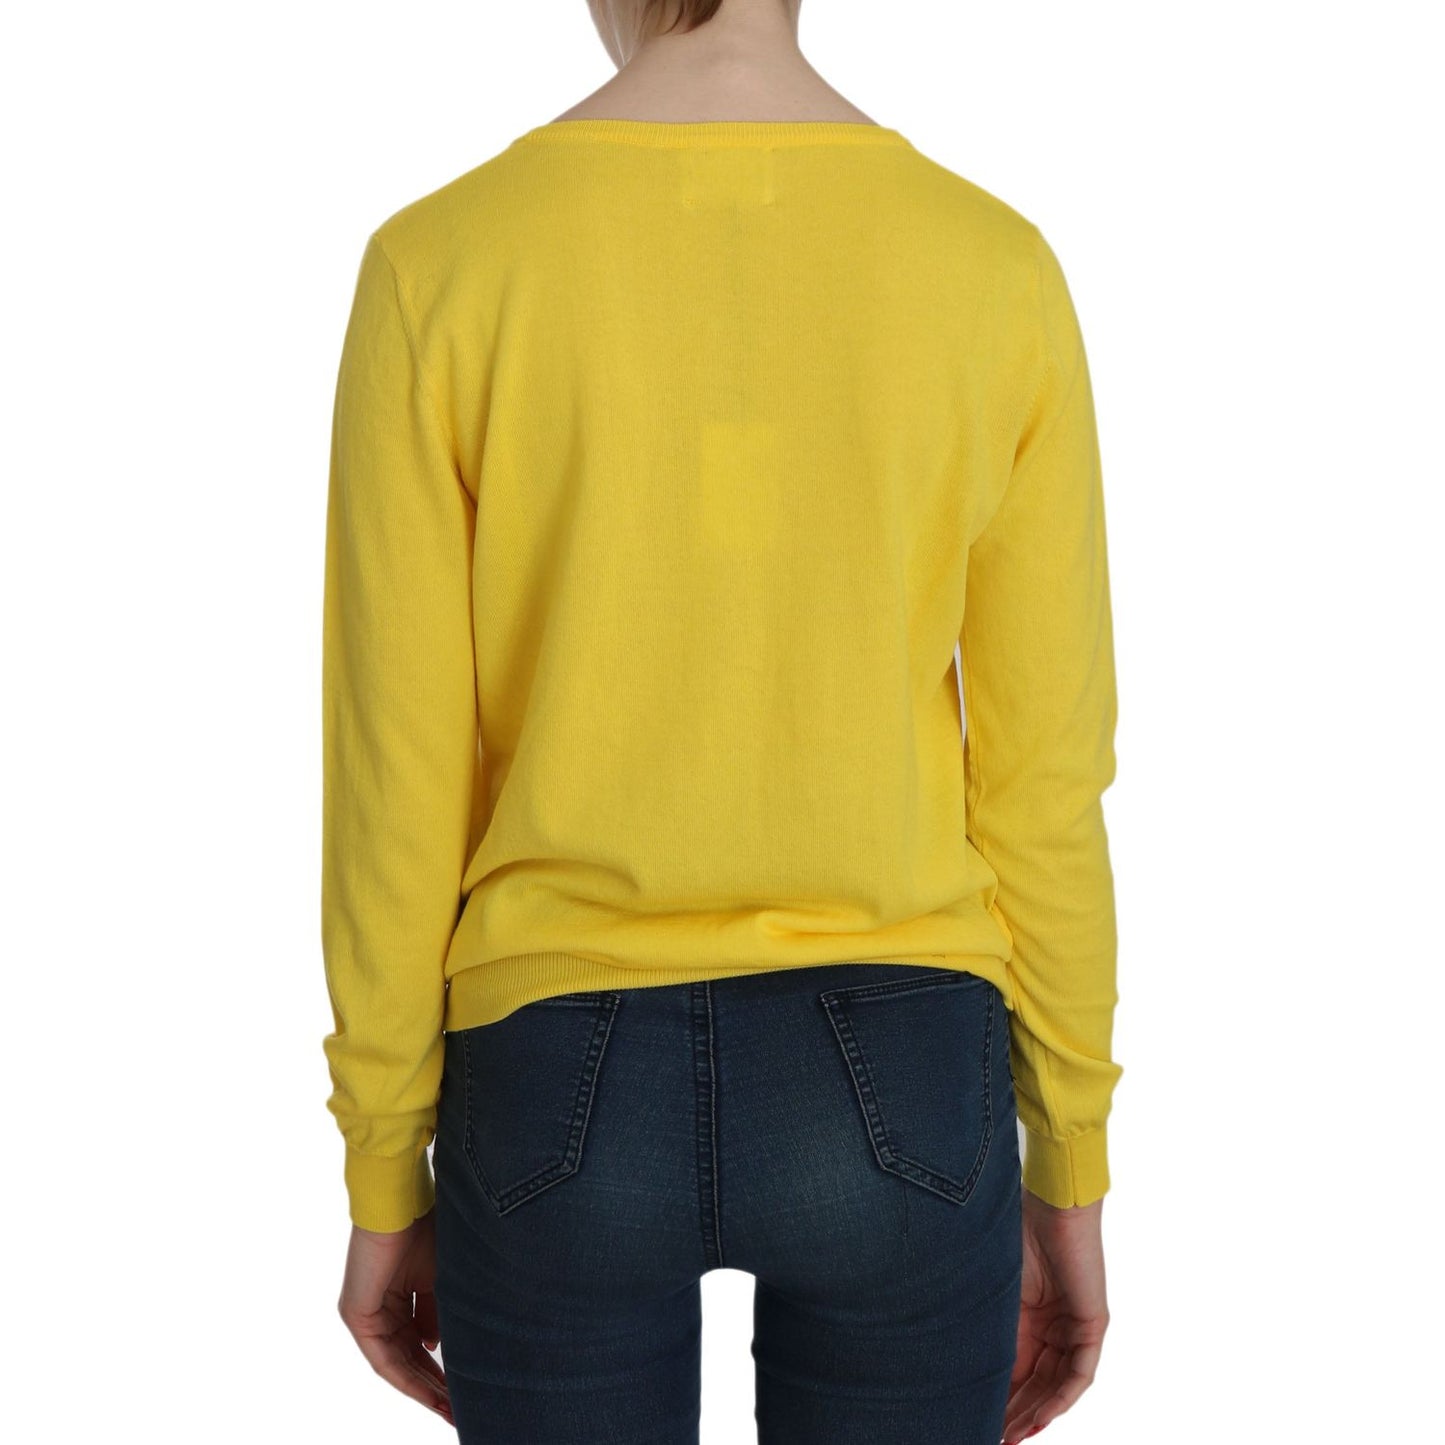 Jucca Radiant Yellow Cotton Sweater yellow-cotton-buttonfront-long-sleeve-sweater IMG_0020-83f0c853-8ce.jpg